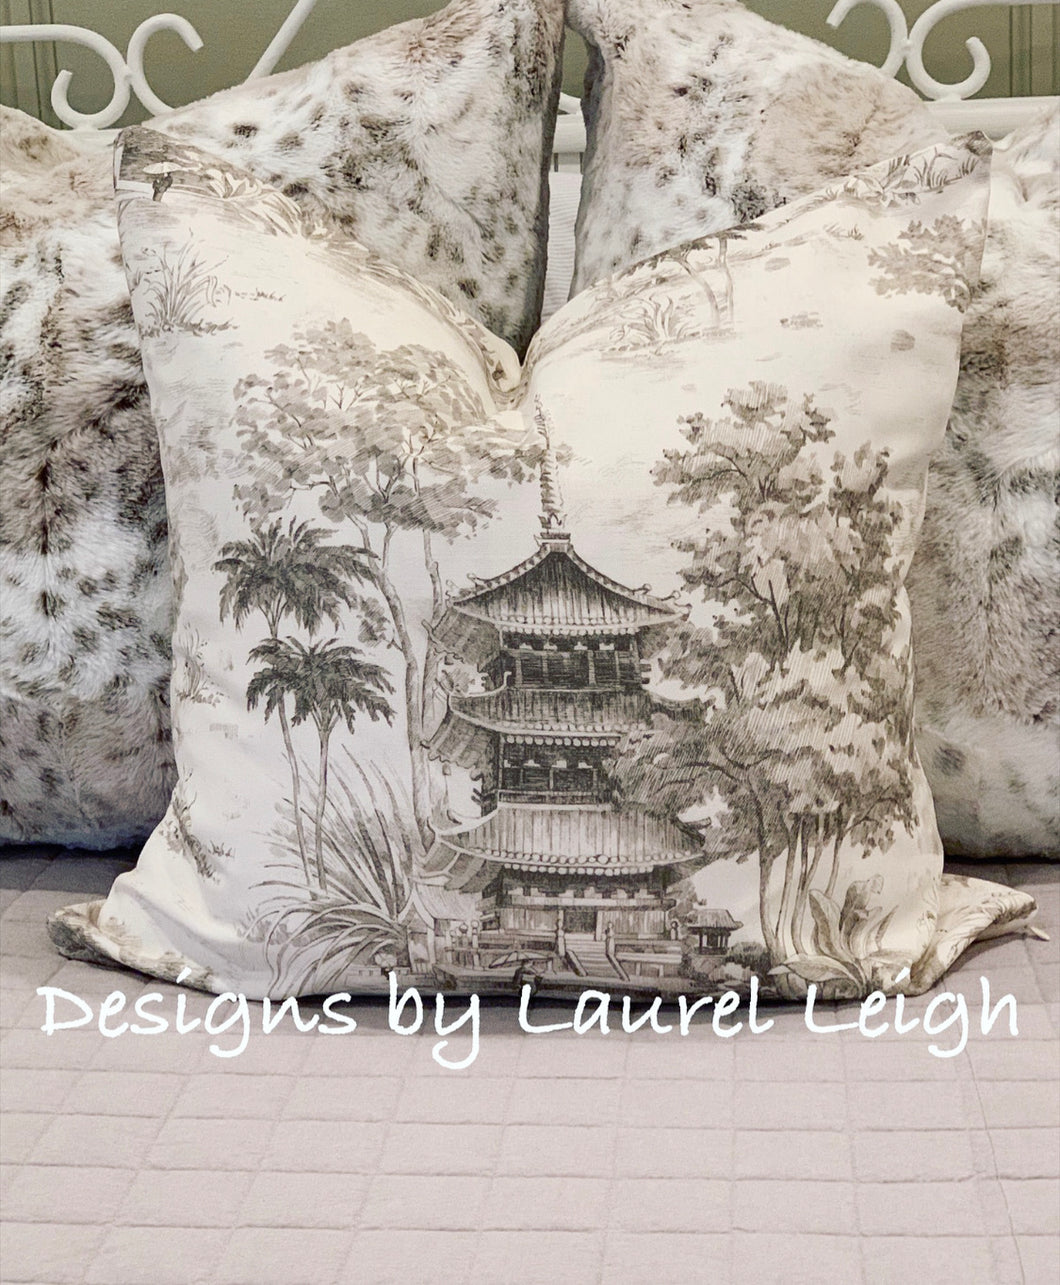 Chinoiserie Pagoda Motif Pillow Cover Set (2) - Griege & Off-White - Ginger jar